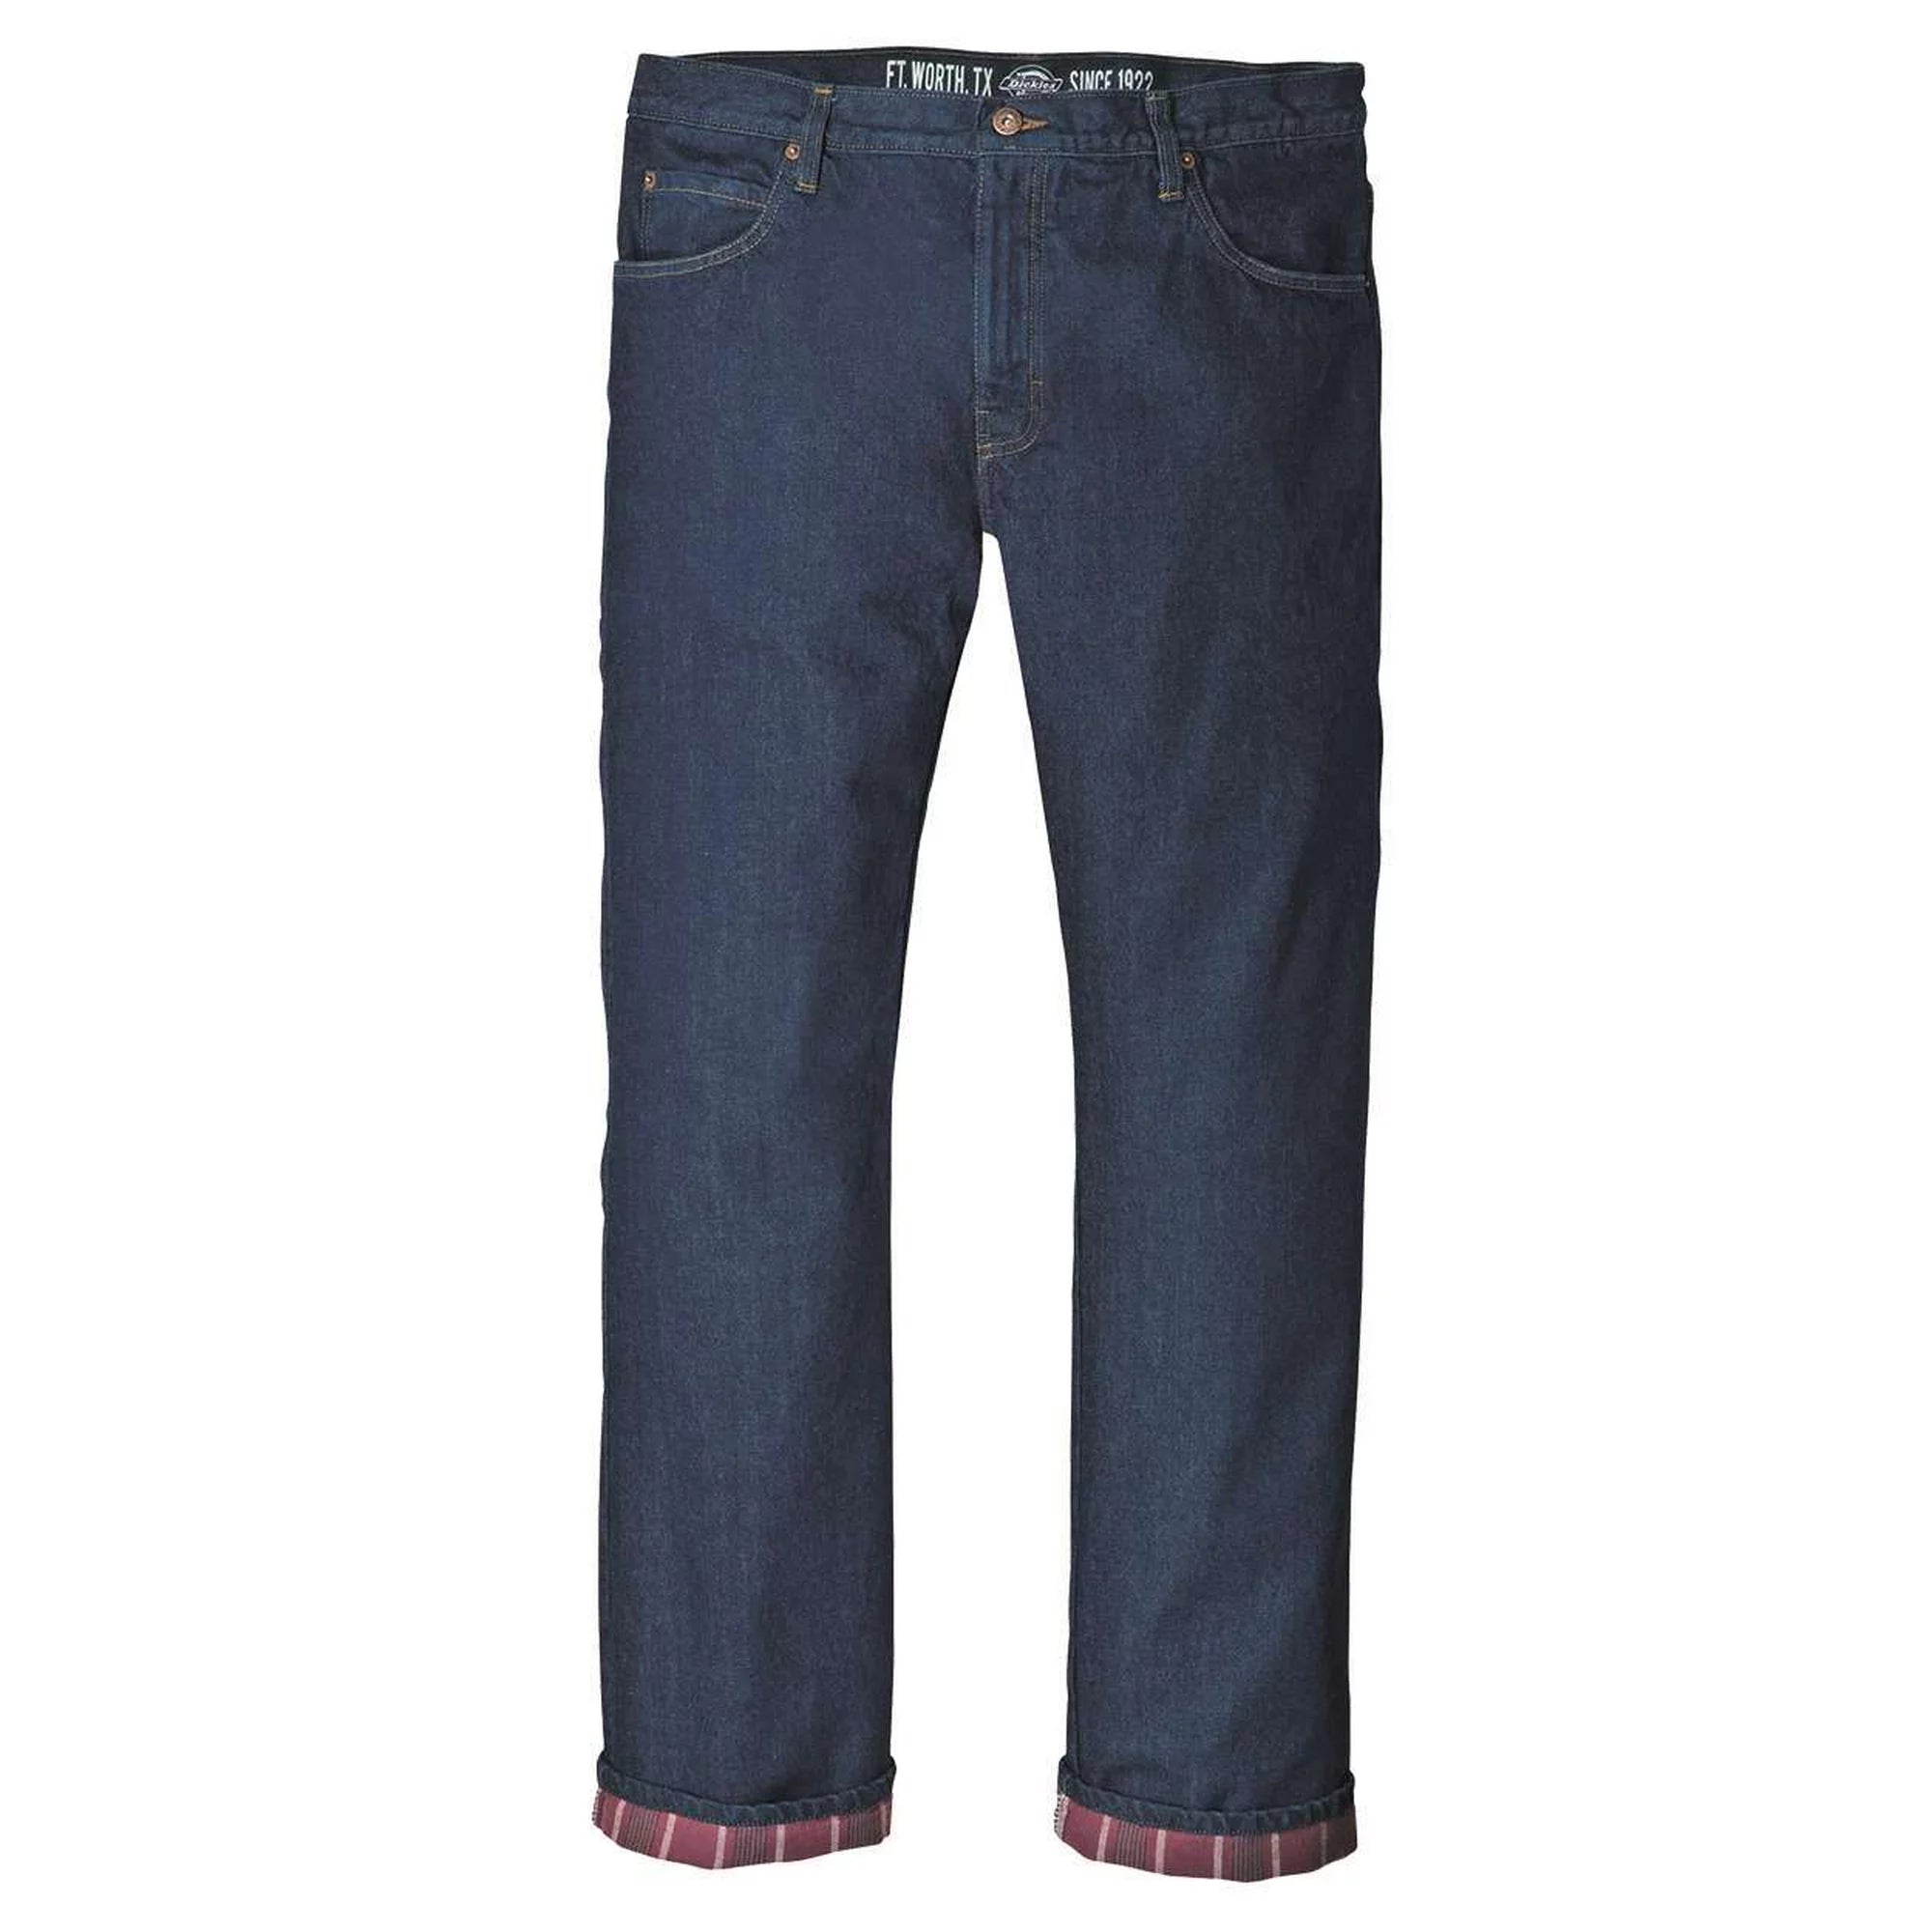 Dickies Flannel-Lined Jeans 40x32 Relaxed Fit Tapered Leg Blue Denim